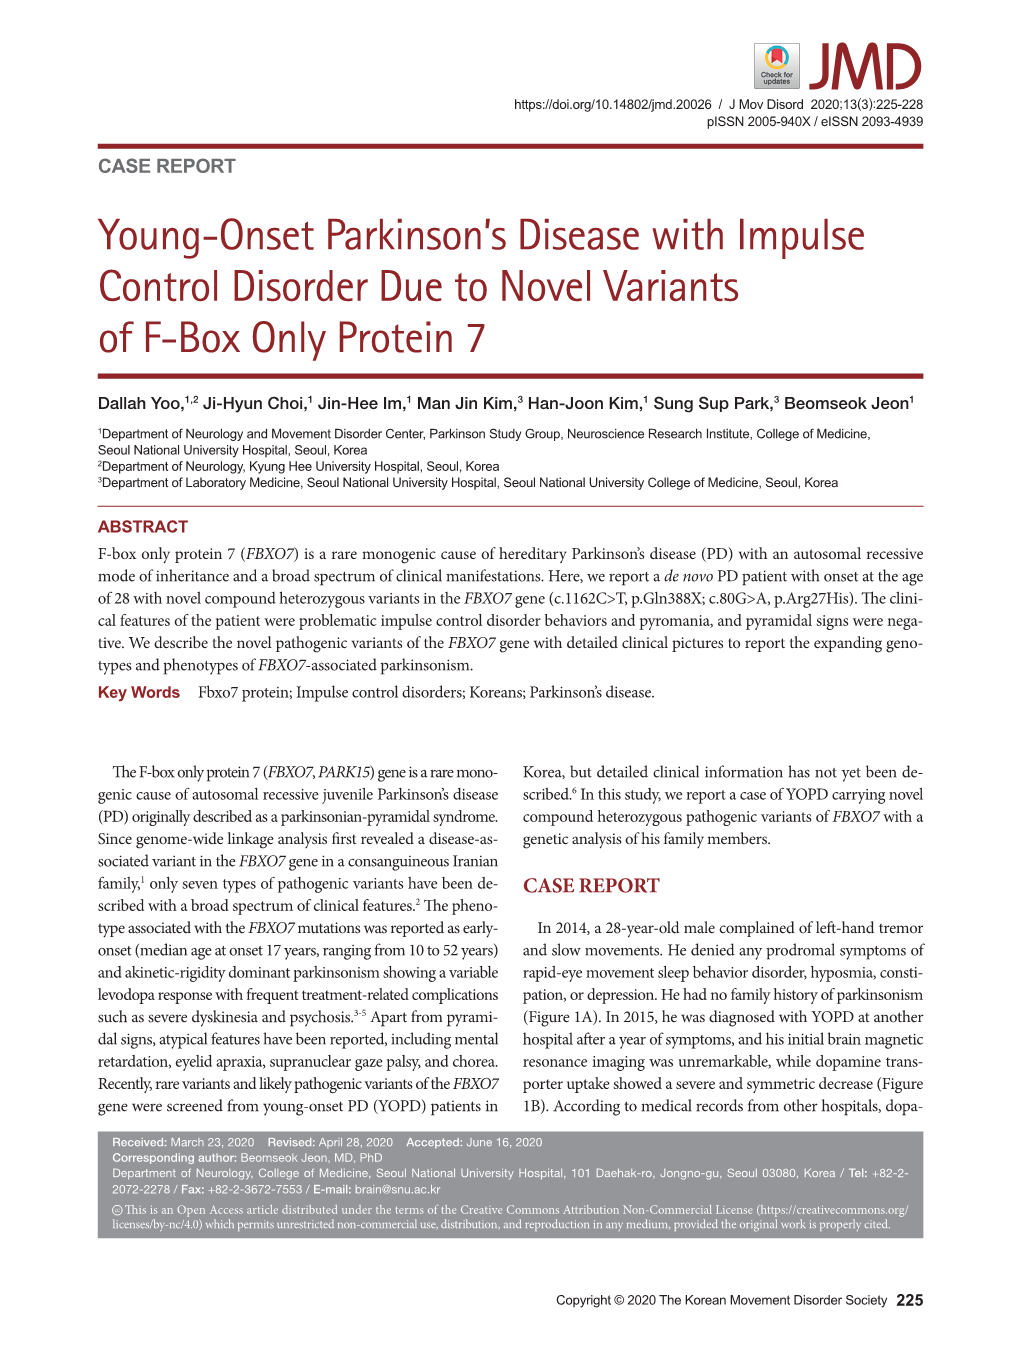 Young-Onset Parkinson's Disease with Impulse Control Disorder